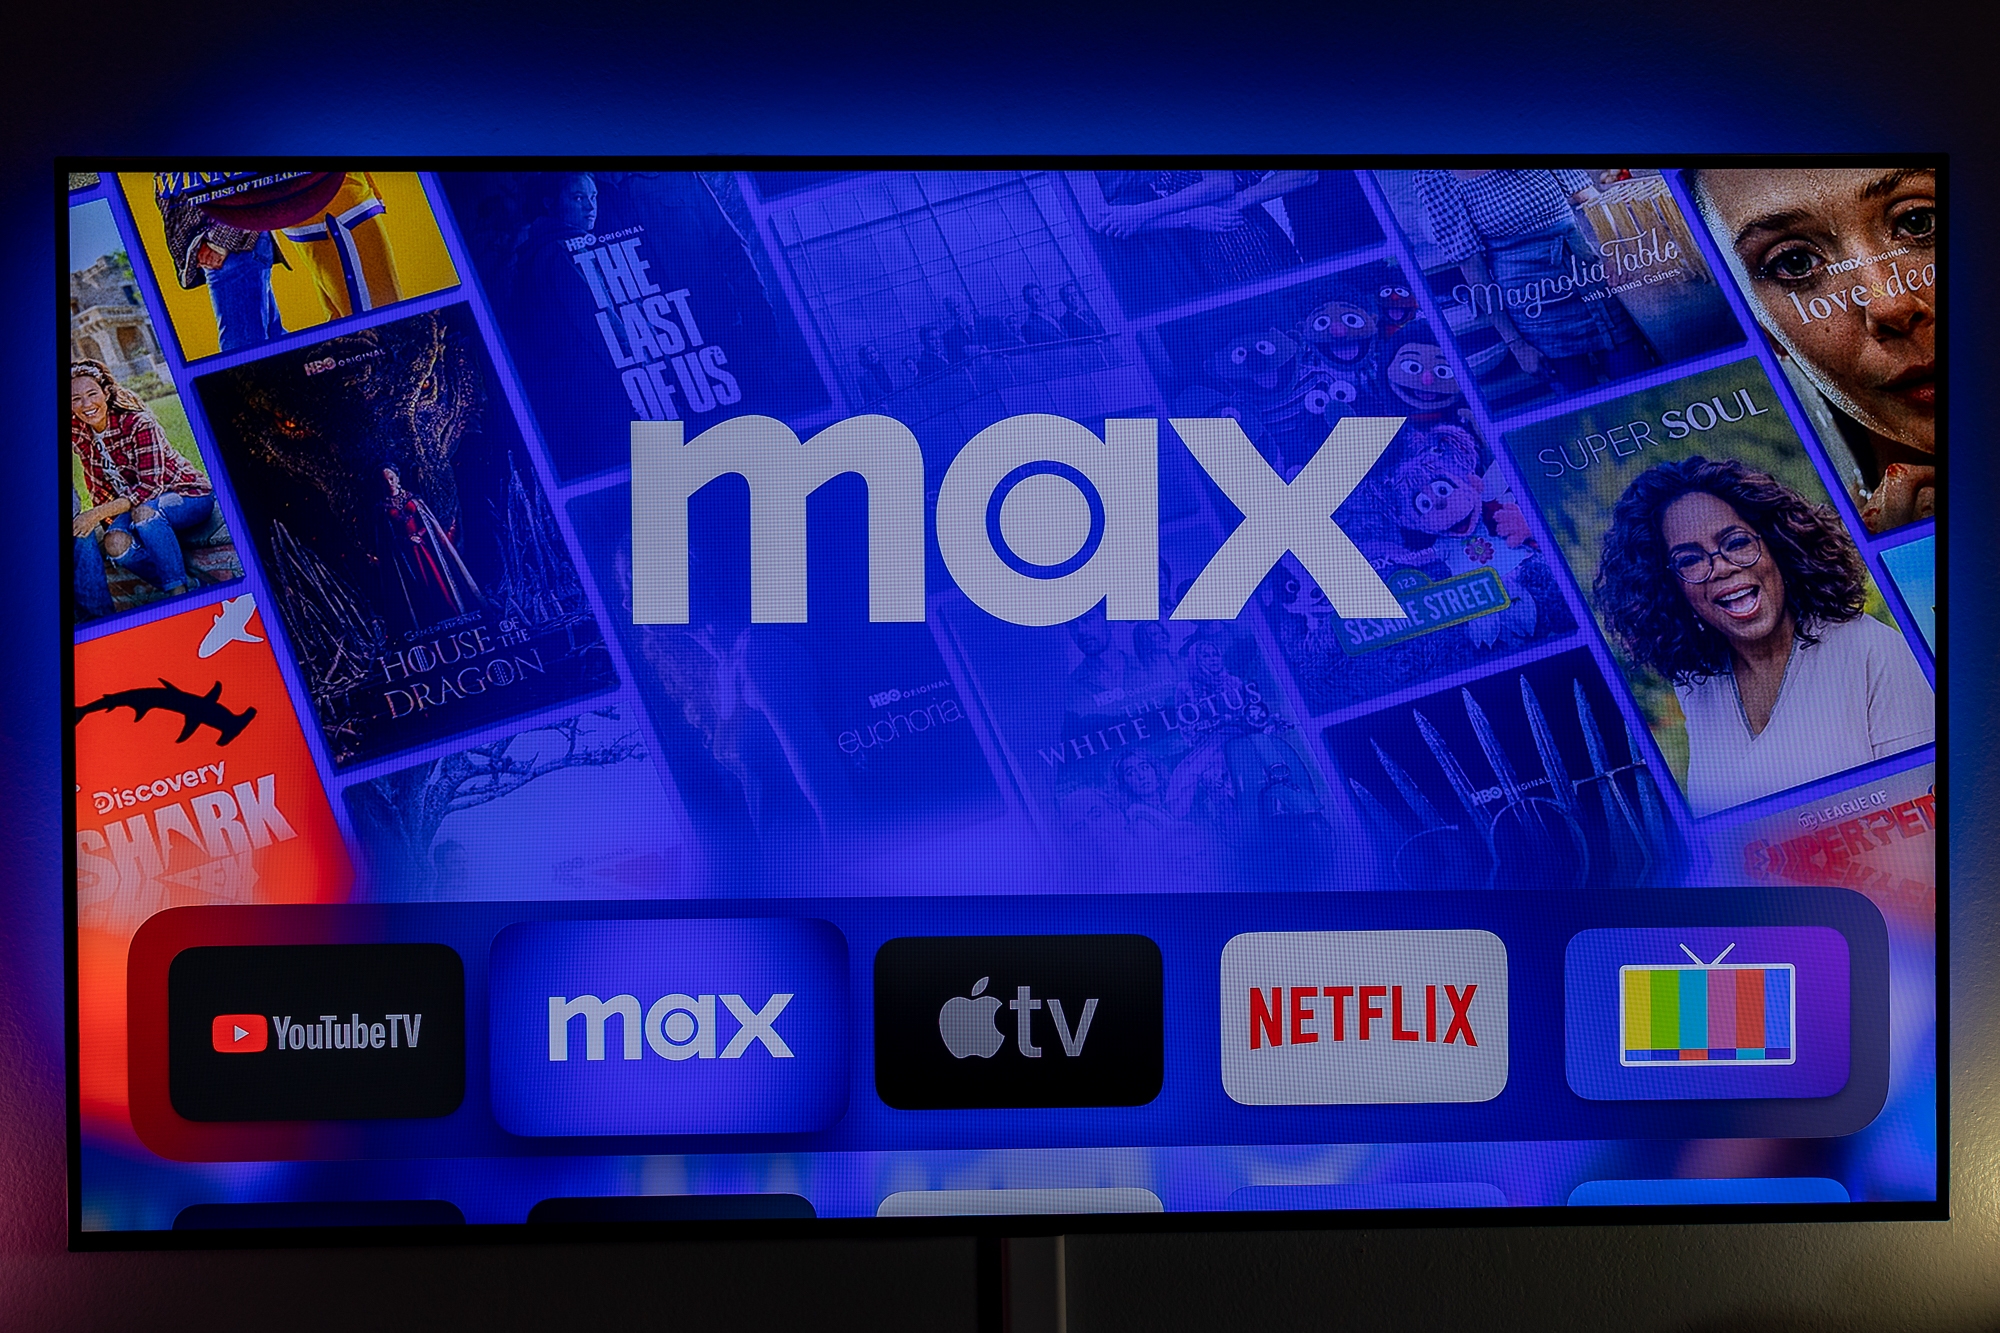 Max: price, movies, shows, and more